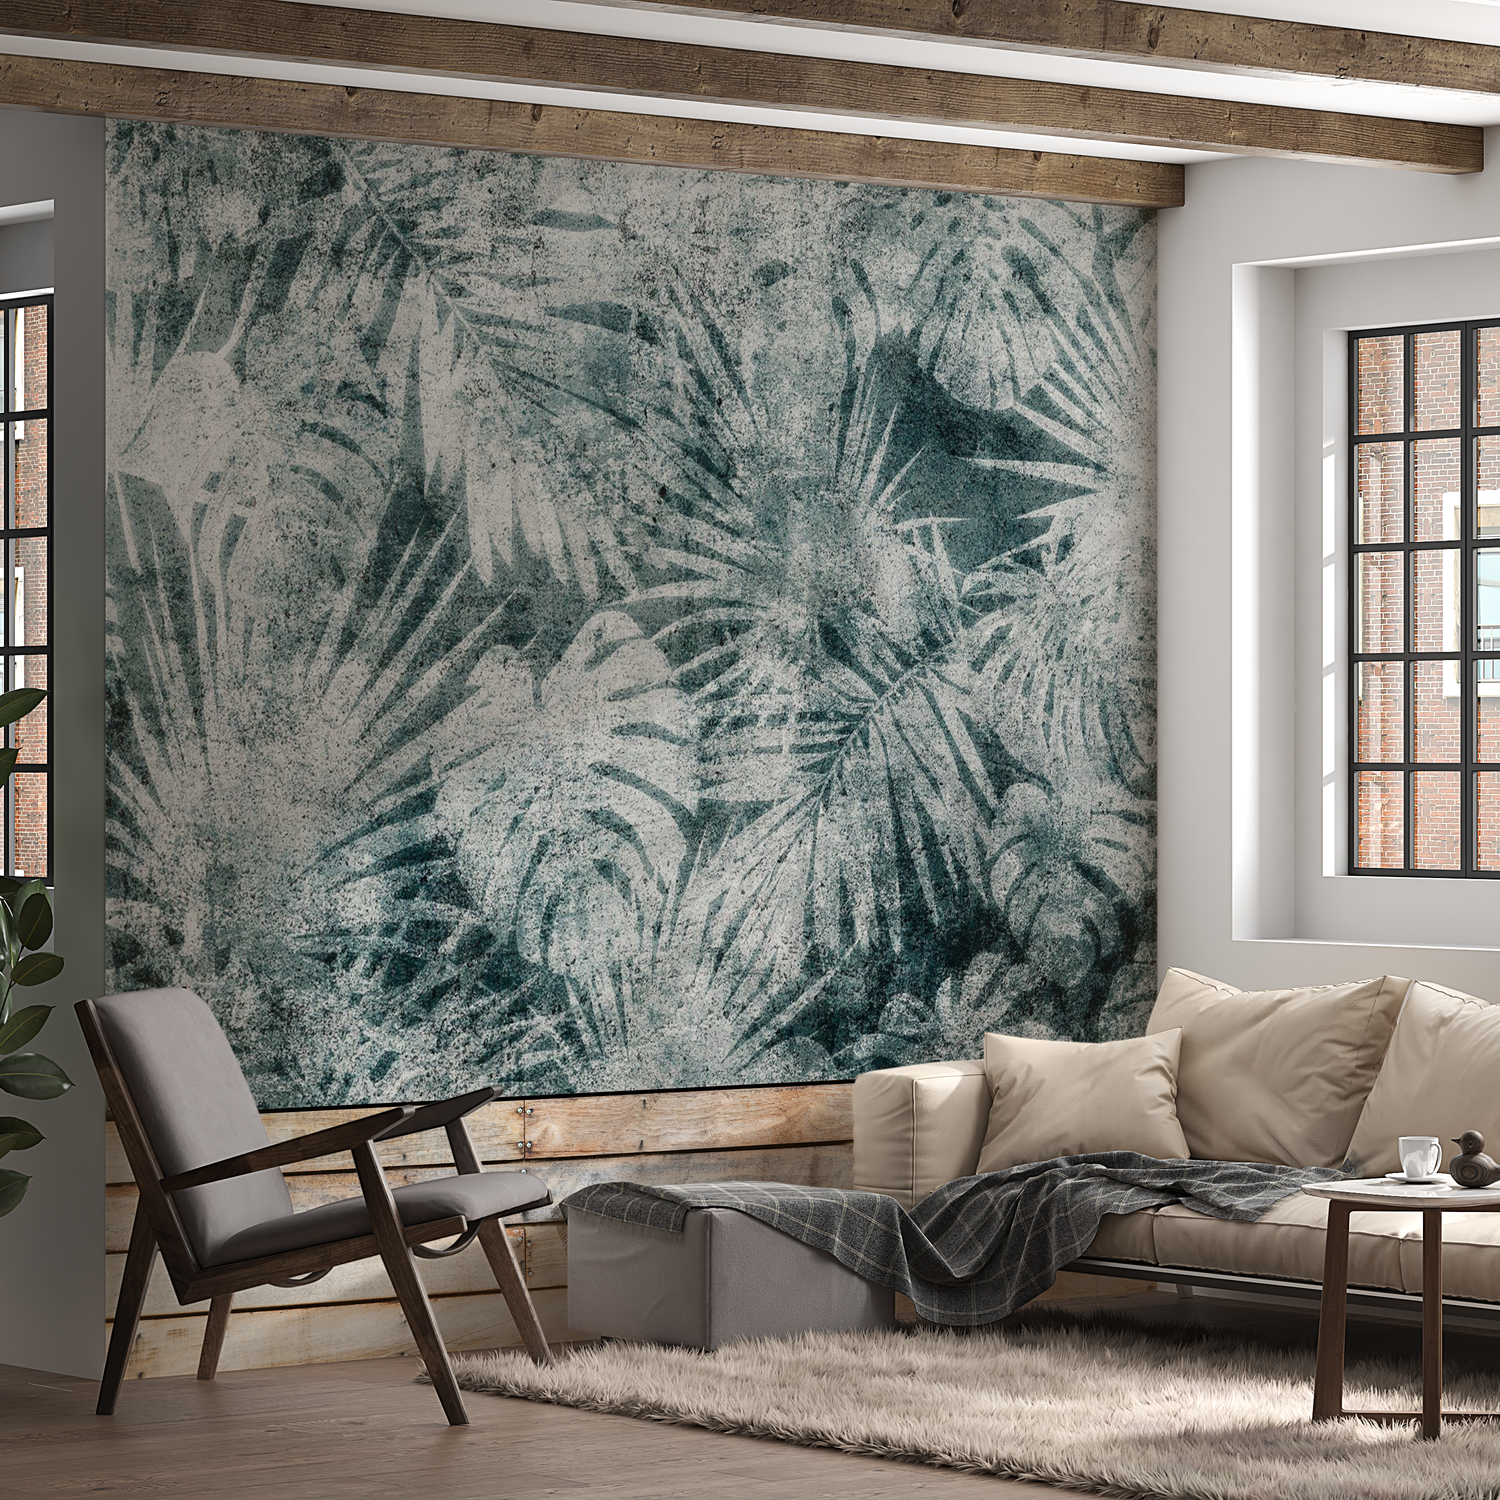 Peel & Stick Botanical Wall Mural - Exotic Jungle Nature - Removable Wallpaper 38"Wx27"H